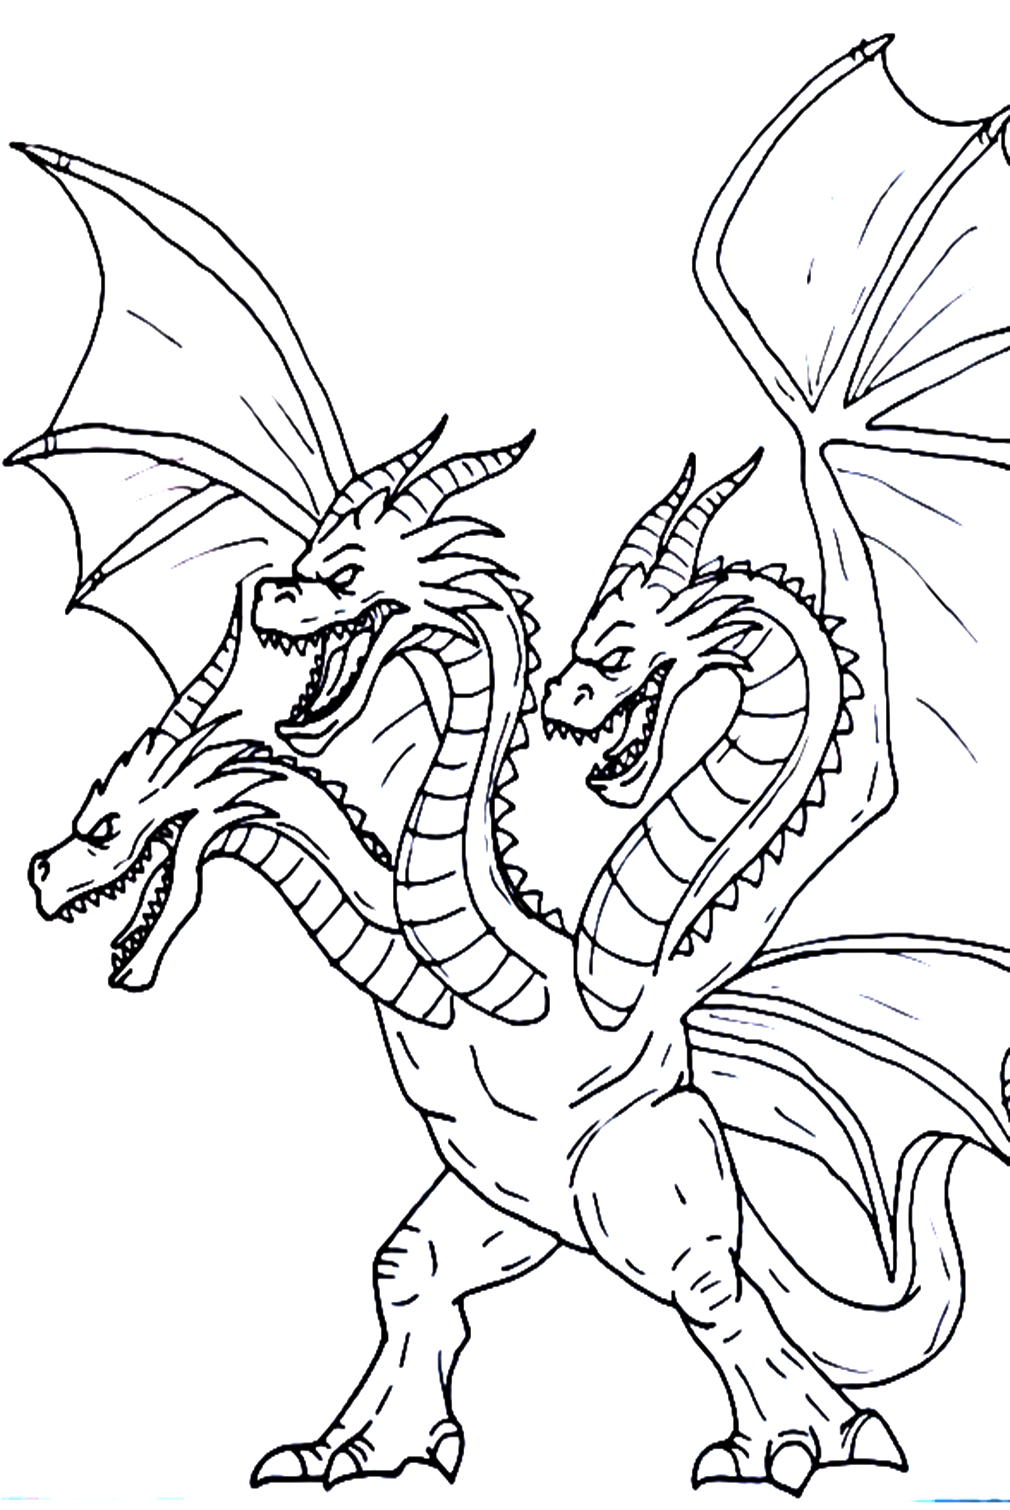 King Ghidorah Picture To Color from King Ghidorah